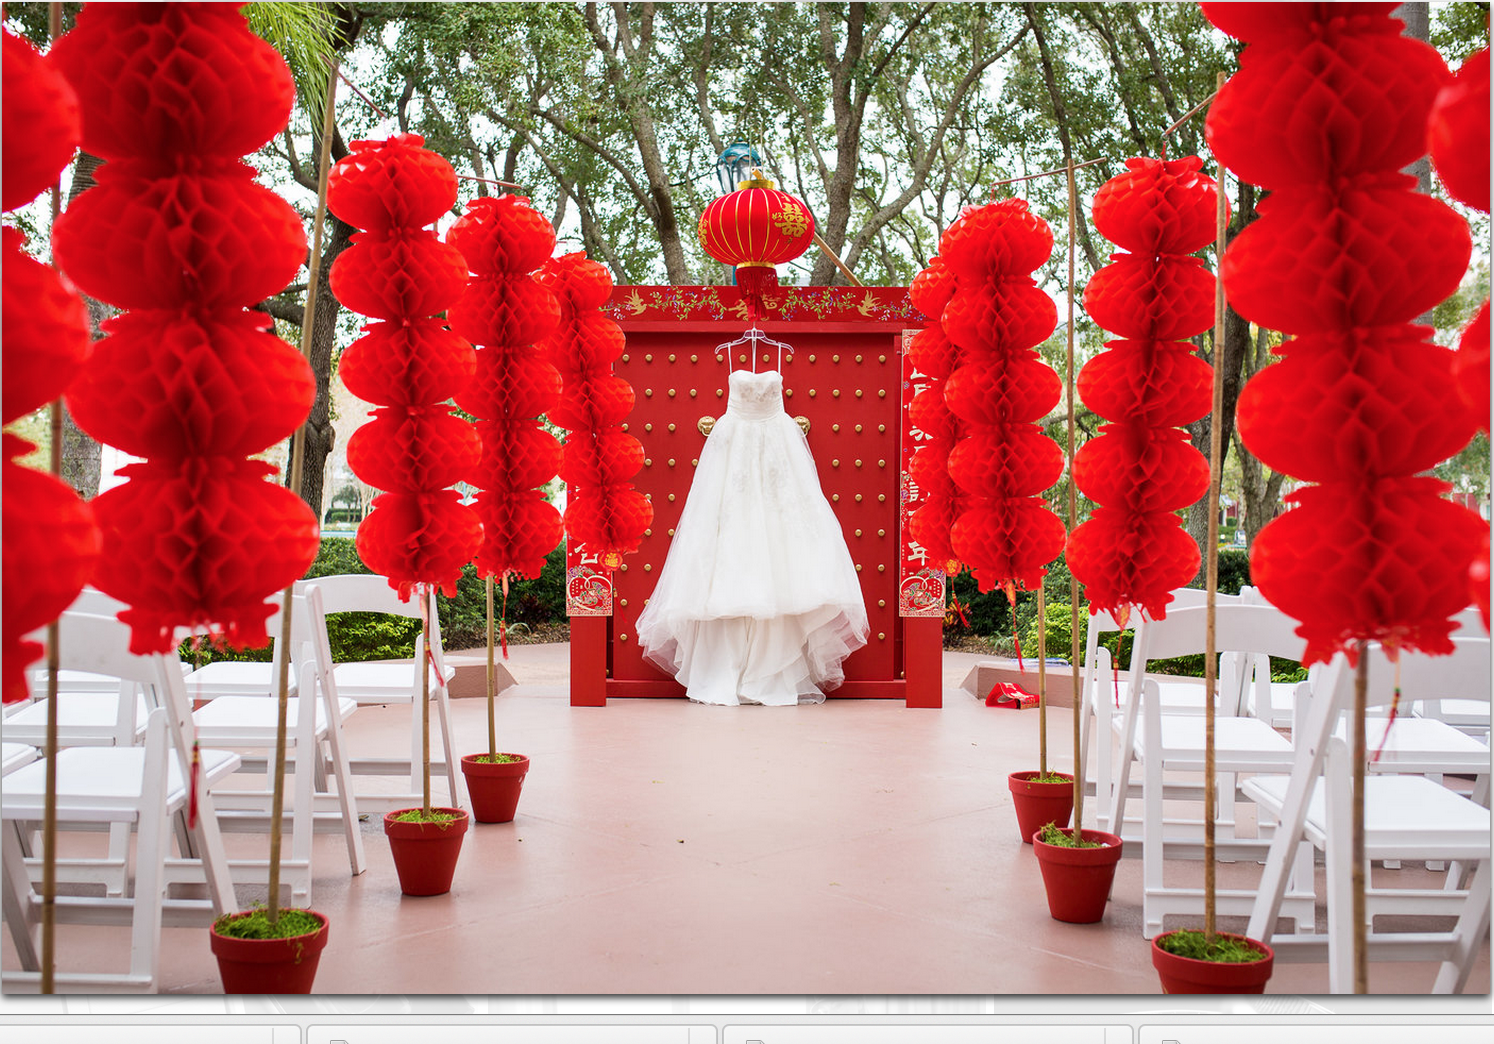 Chinese Wedding Wallpapers High Quality | Download Free